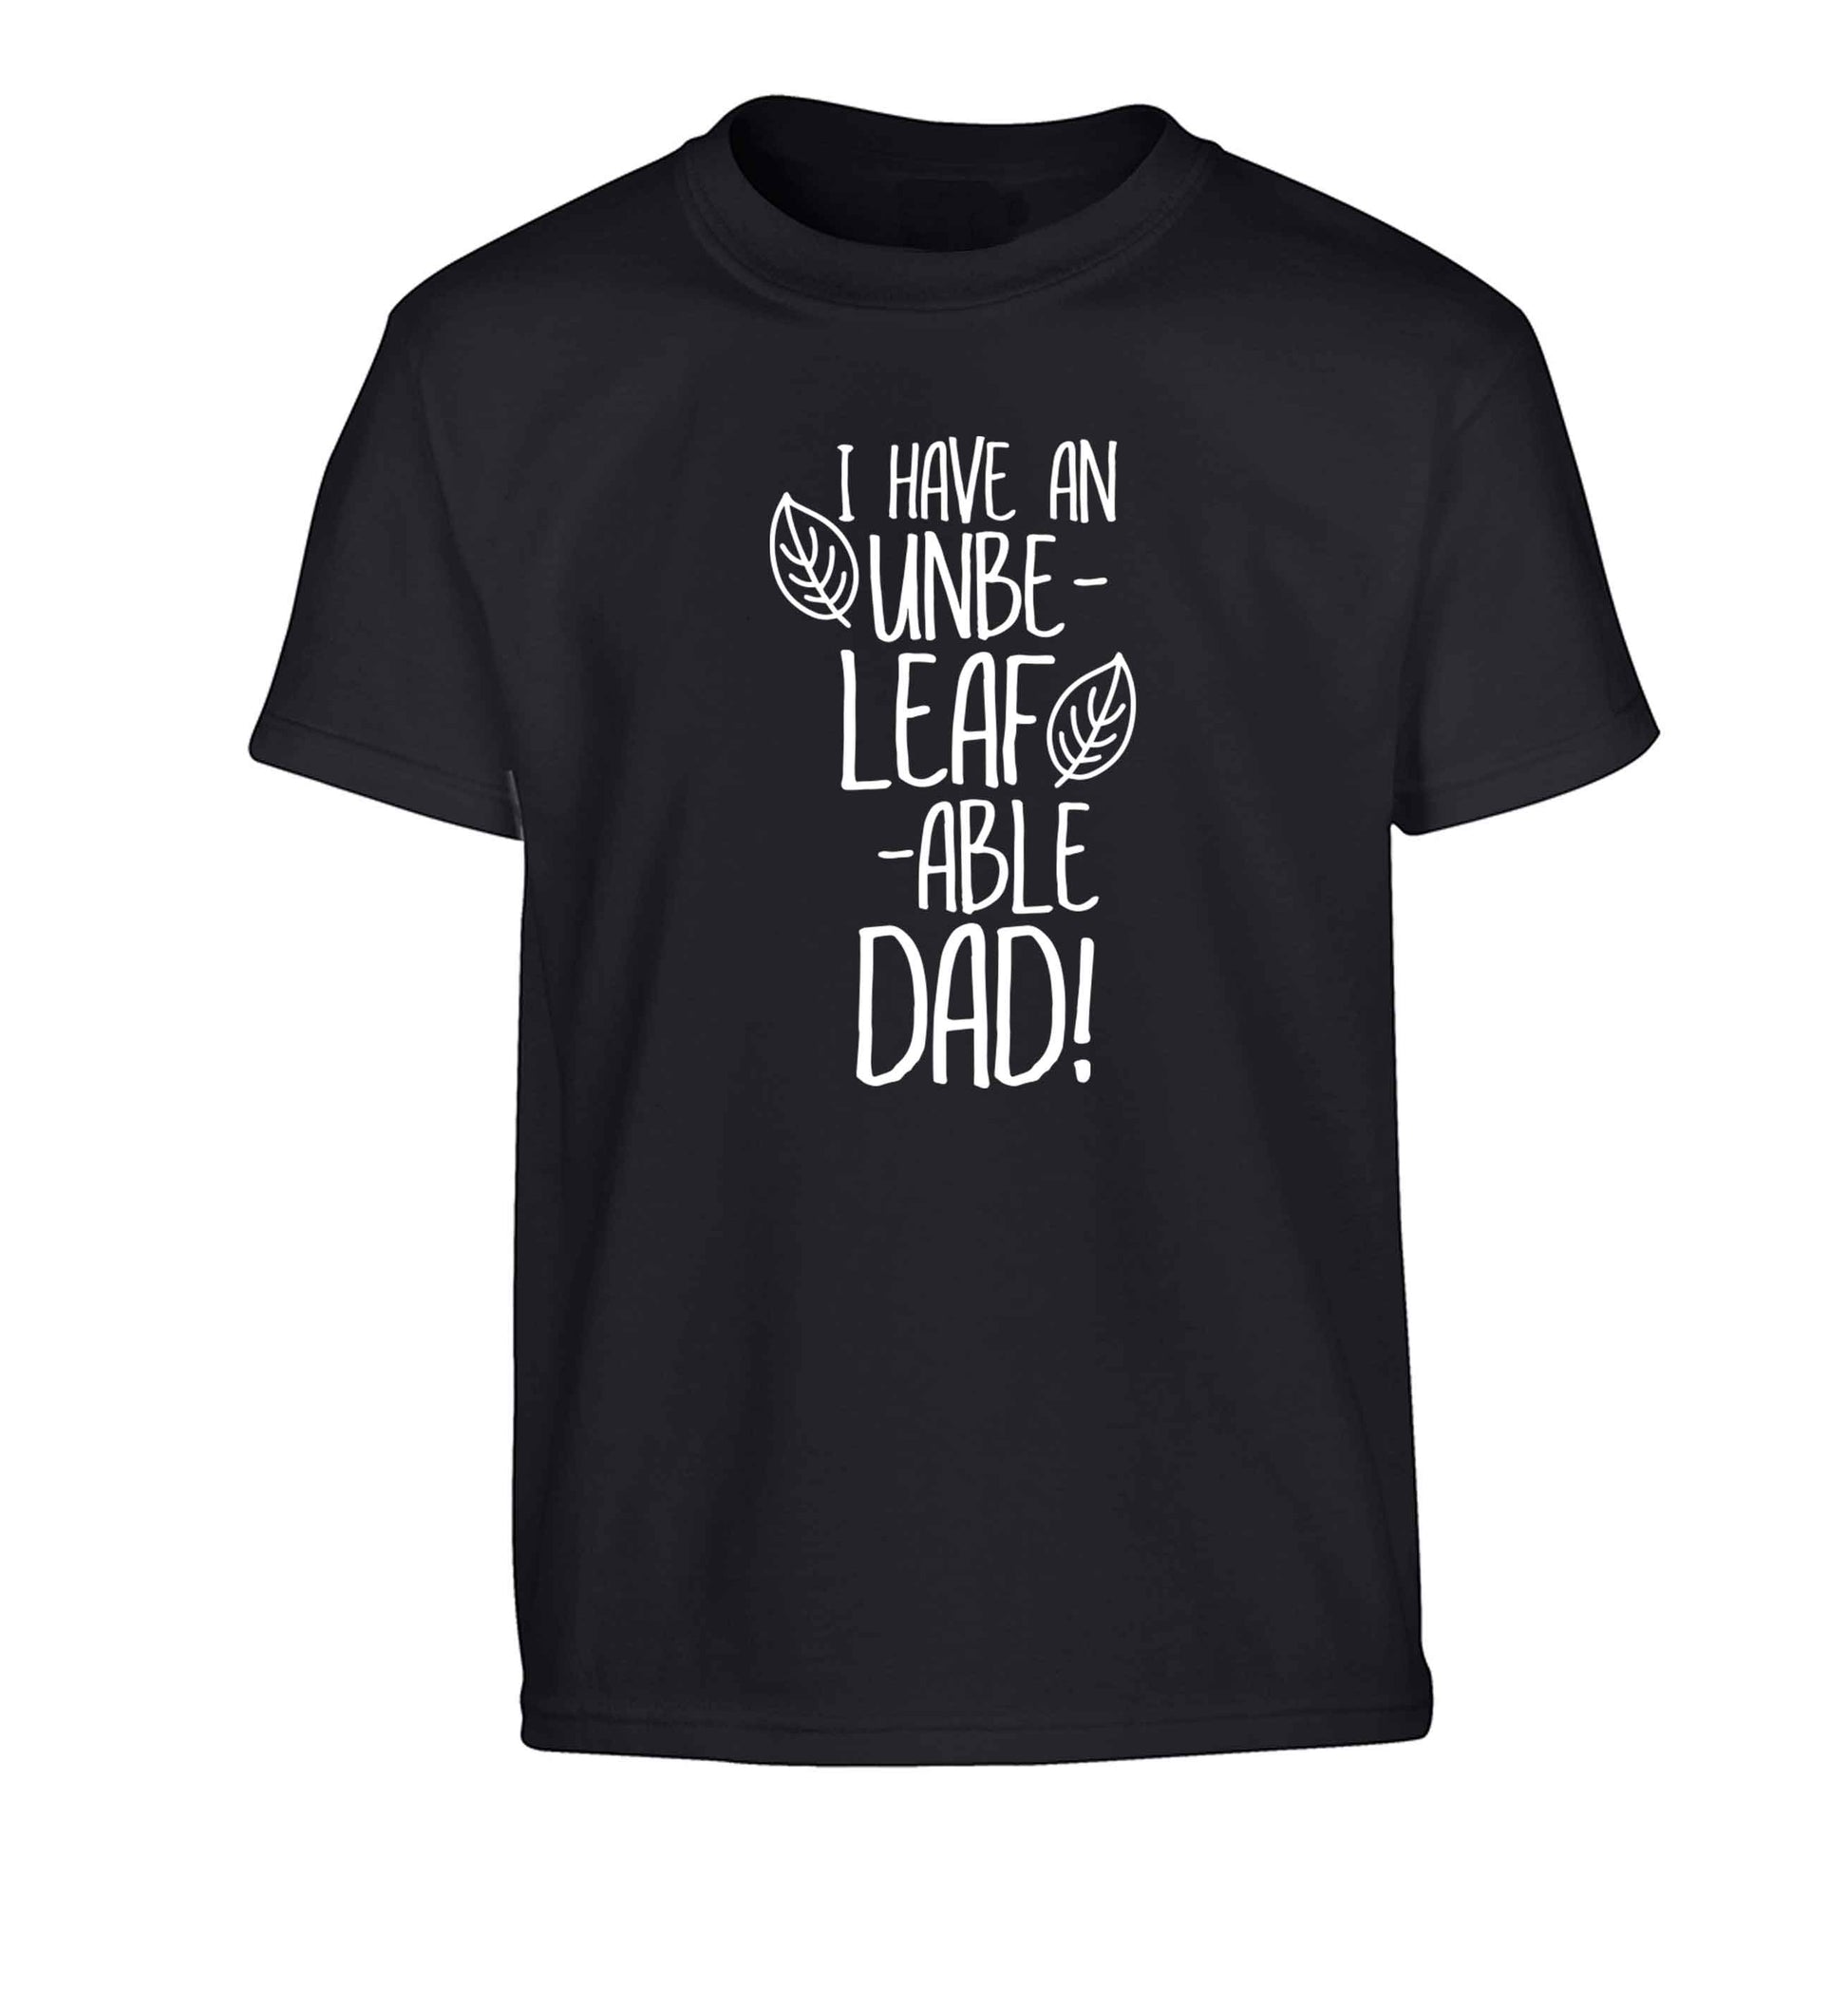 I have an unbe-leaf-able dad Children's black Tshirt 12-13 Years